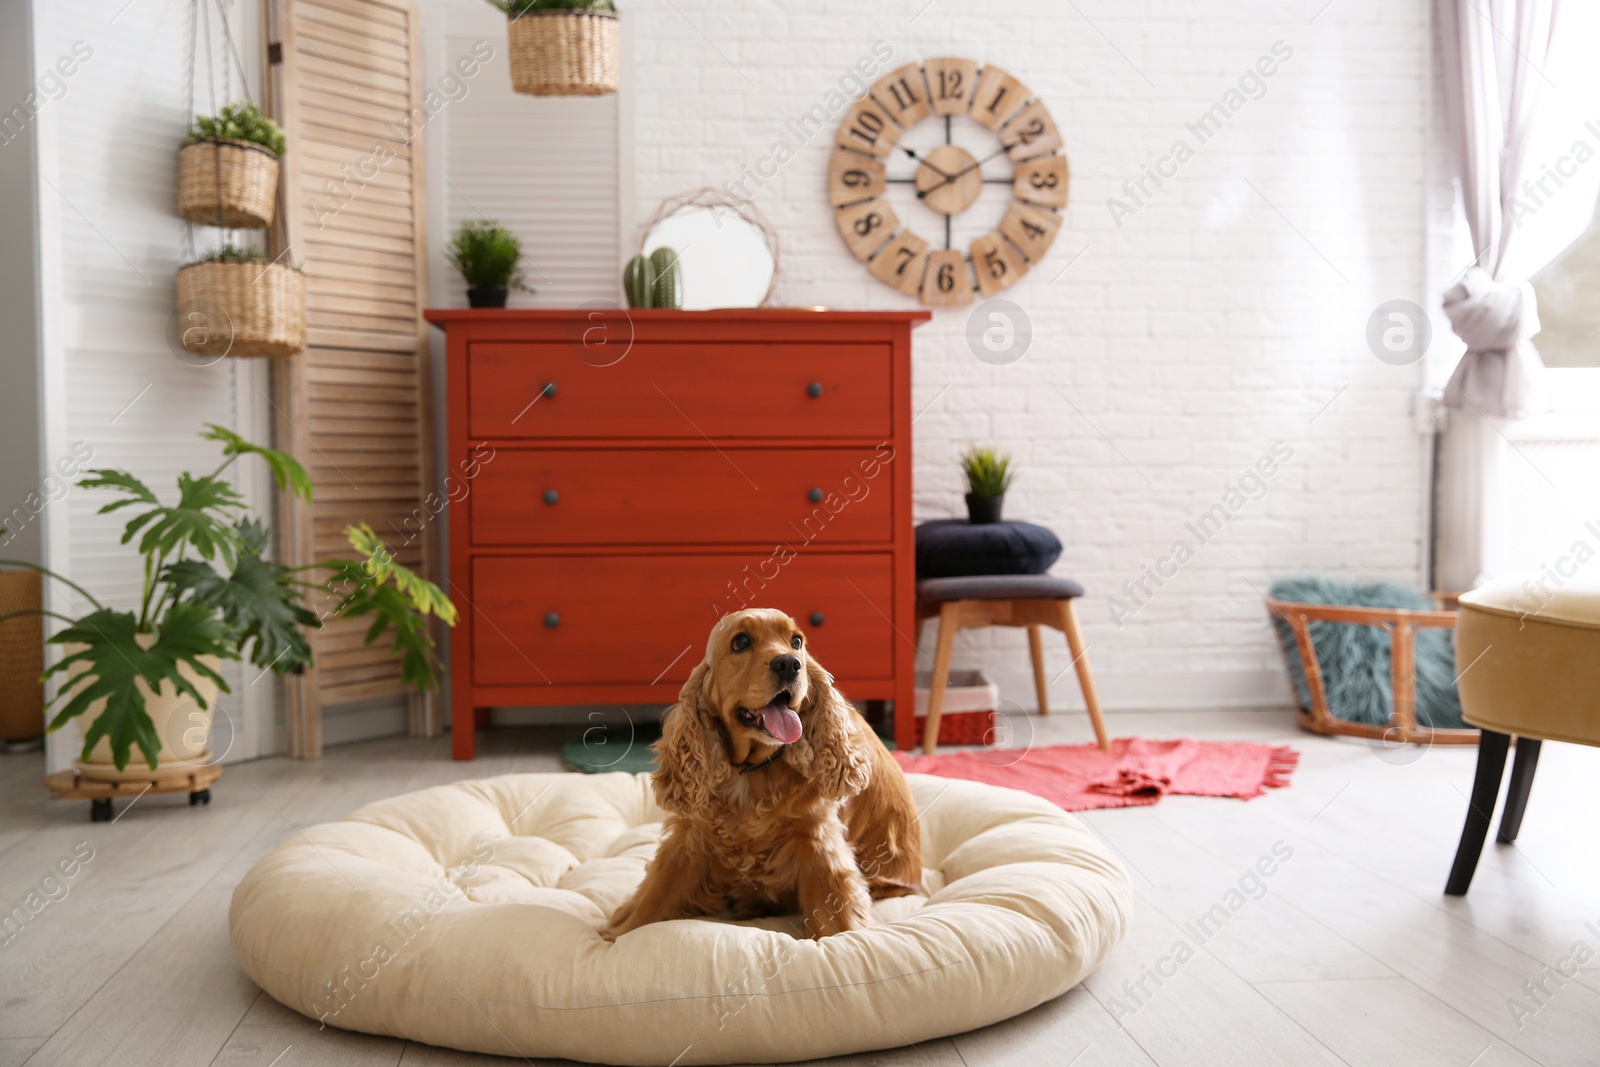 Photo of Adorable dog on pet bed in stylish room interior